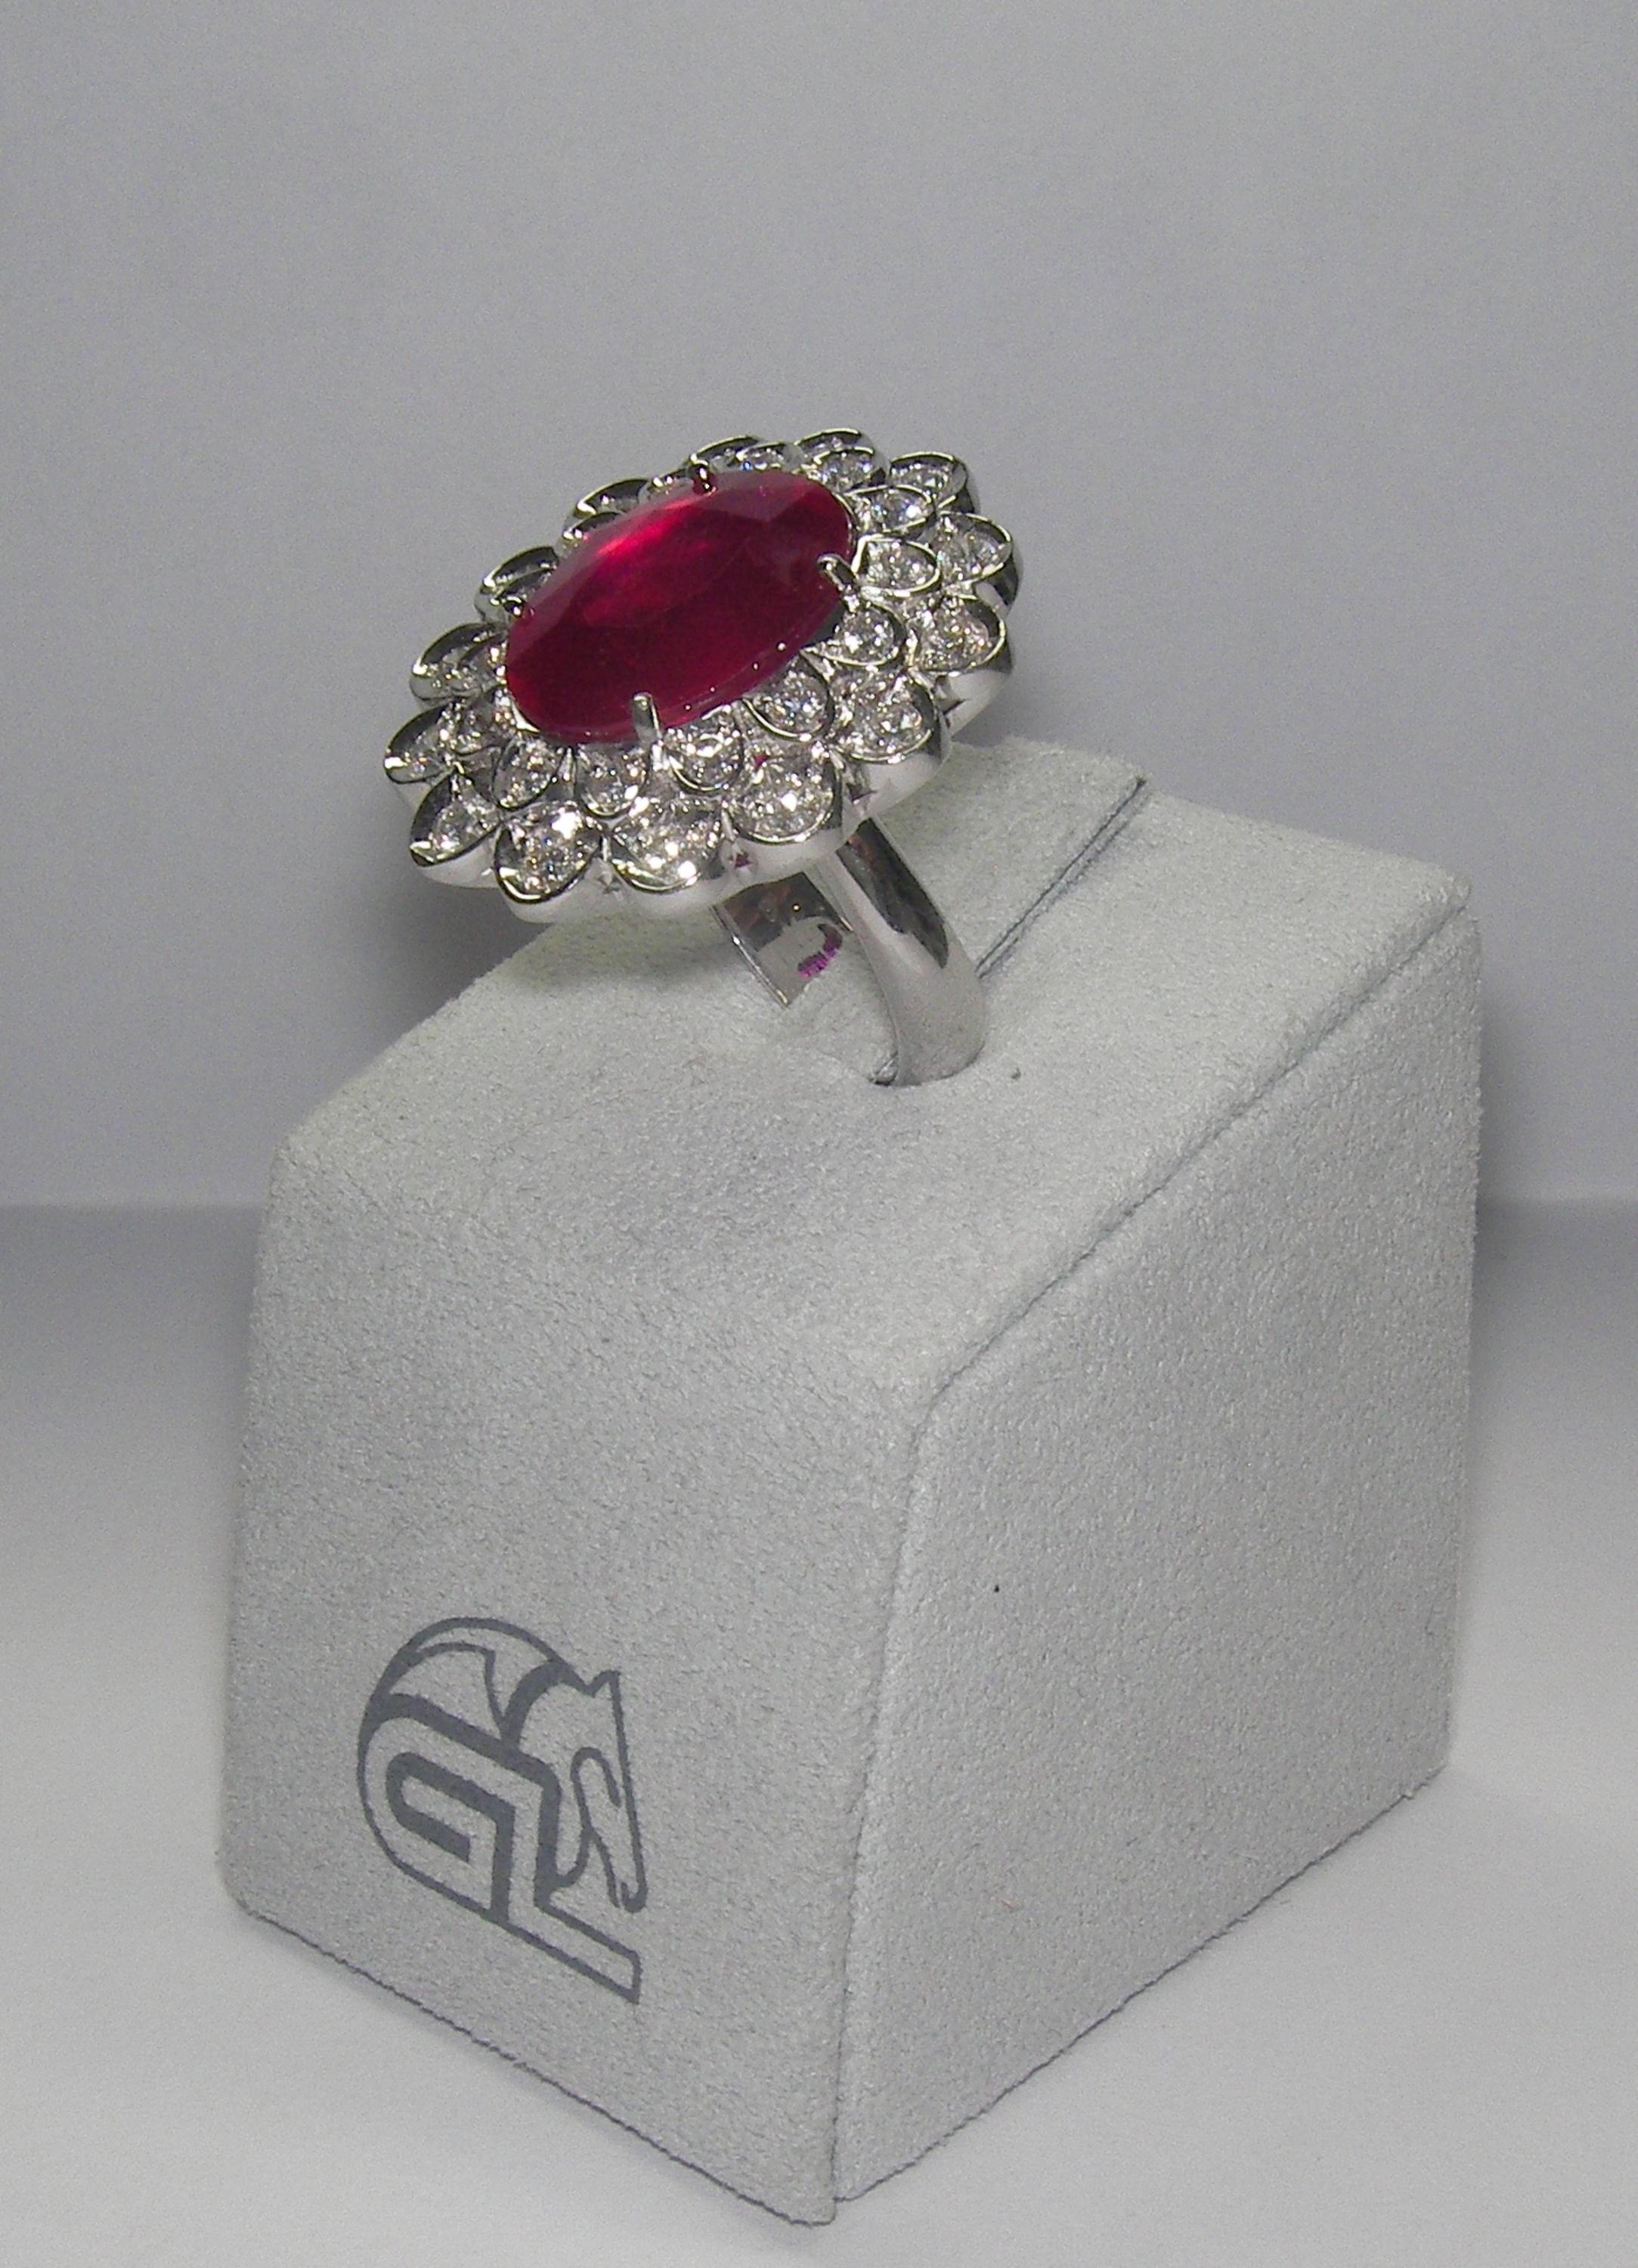 18 Karat White Gold Diamond and  Ruby Glass felt  Coktail Ring

28 Diam. 1,09 Carat
1  Ruby 9,58 Carat

Size 51 US 5






















34 Blue Topaz 17.36 Carats 
168 Diamonds 0.78 Carats


Founded in 1974, Gianni Lazzaro is a family-owned